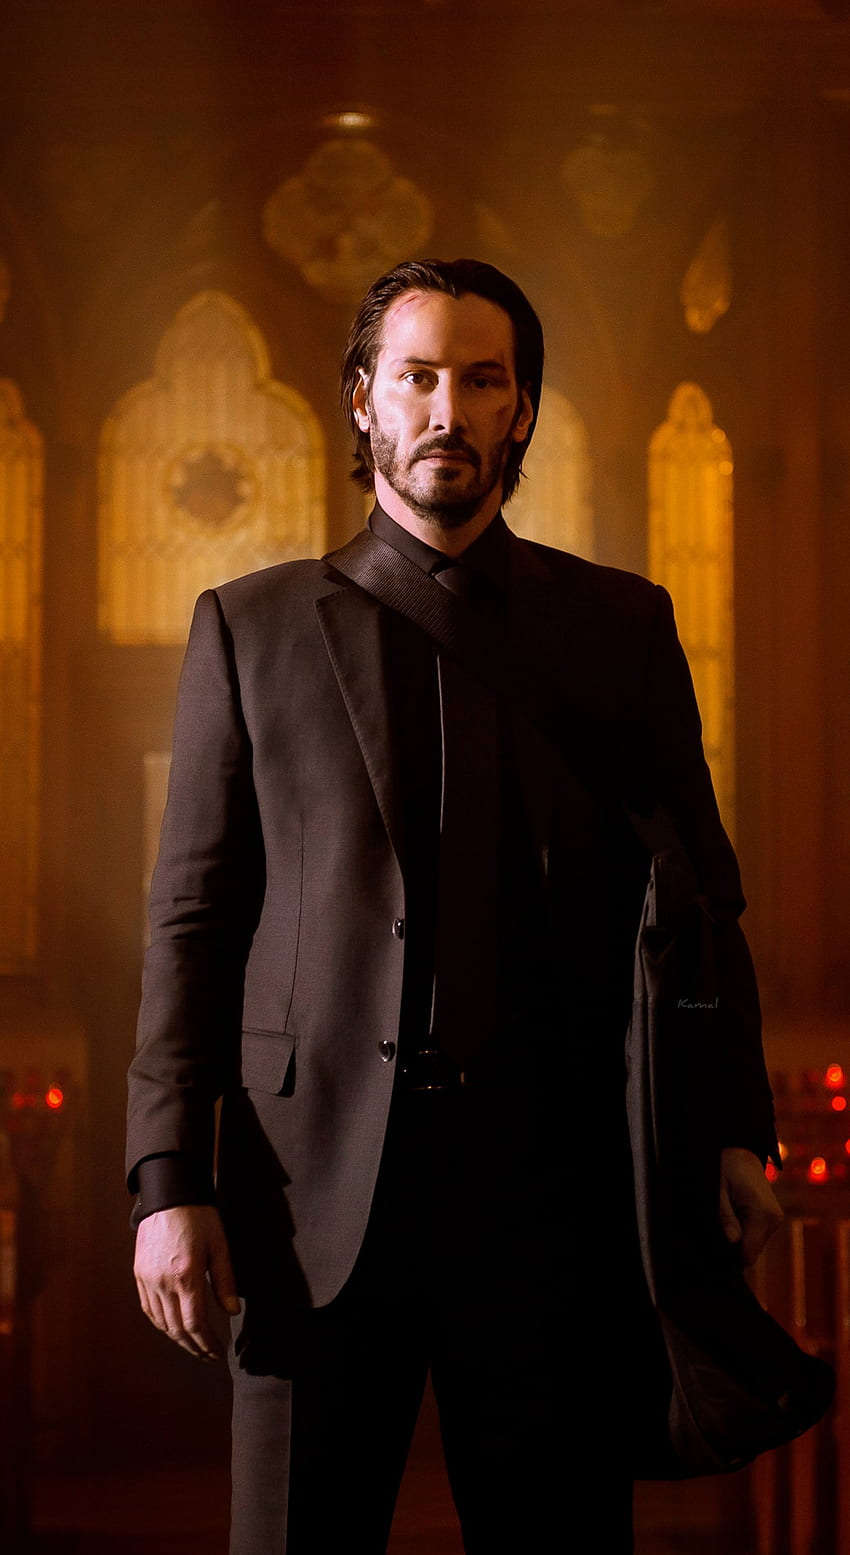 John Wick 4 delayed to 2022, clearing way for Keanu Reeves' Matrix